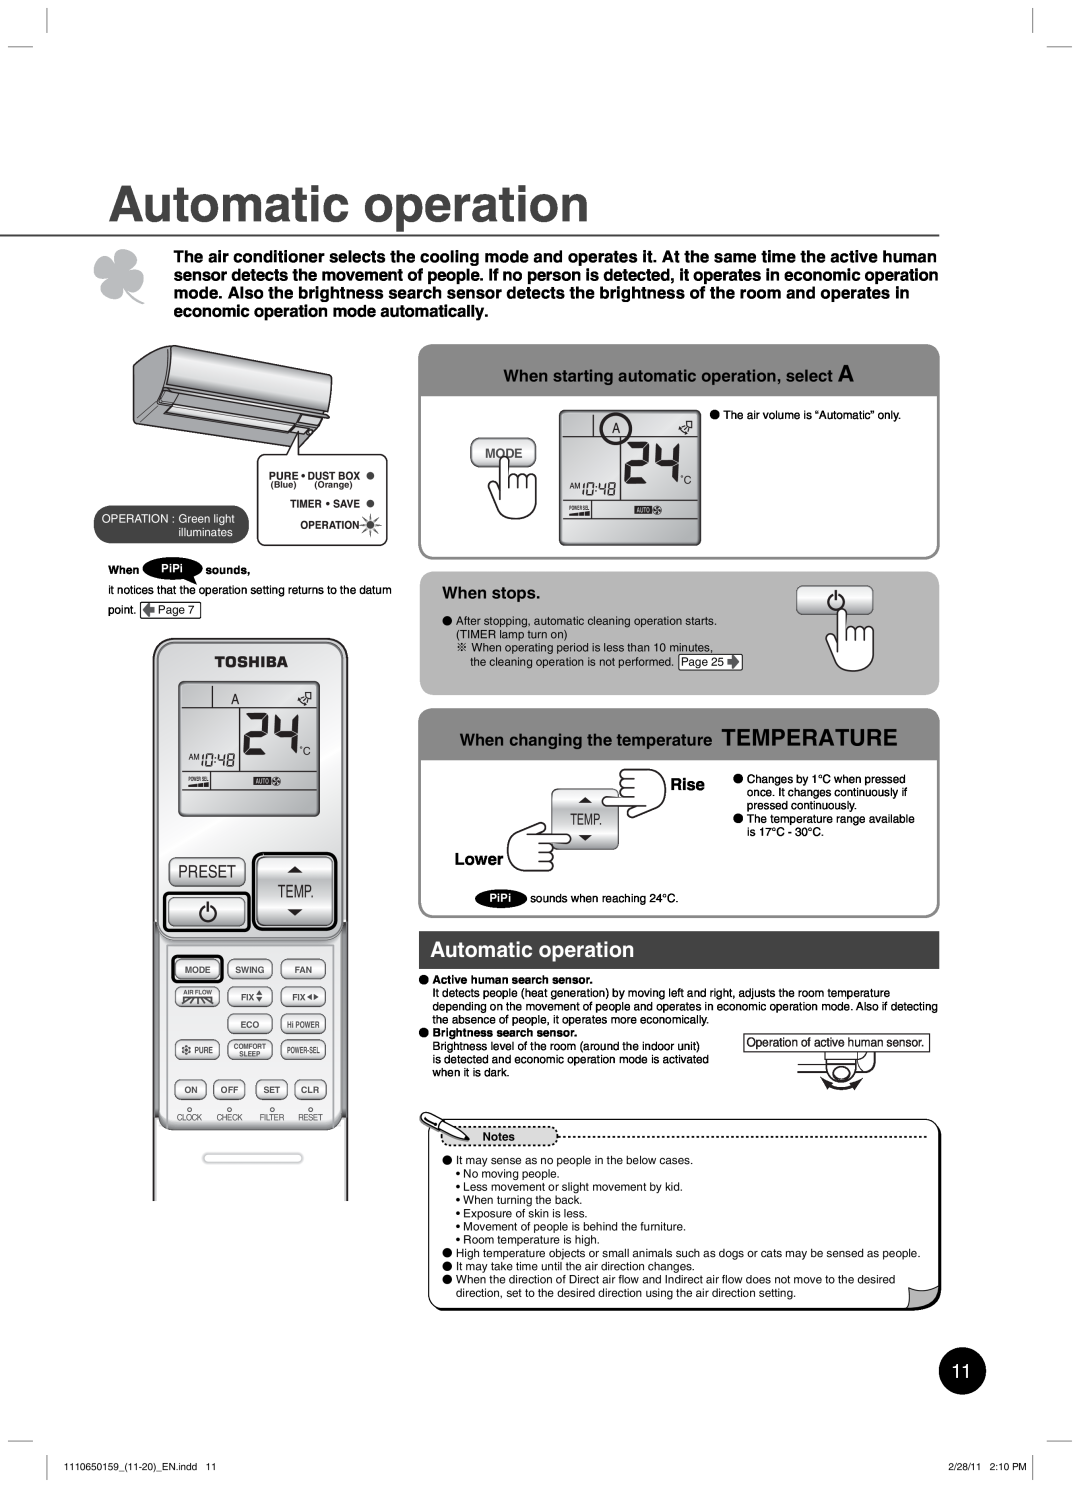 Toshiba RAS-10JKCVP Automatic operation, Preset Temp, When starting automatic operation, select A, When stops, Lower, Mode 